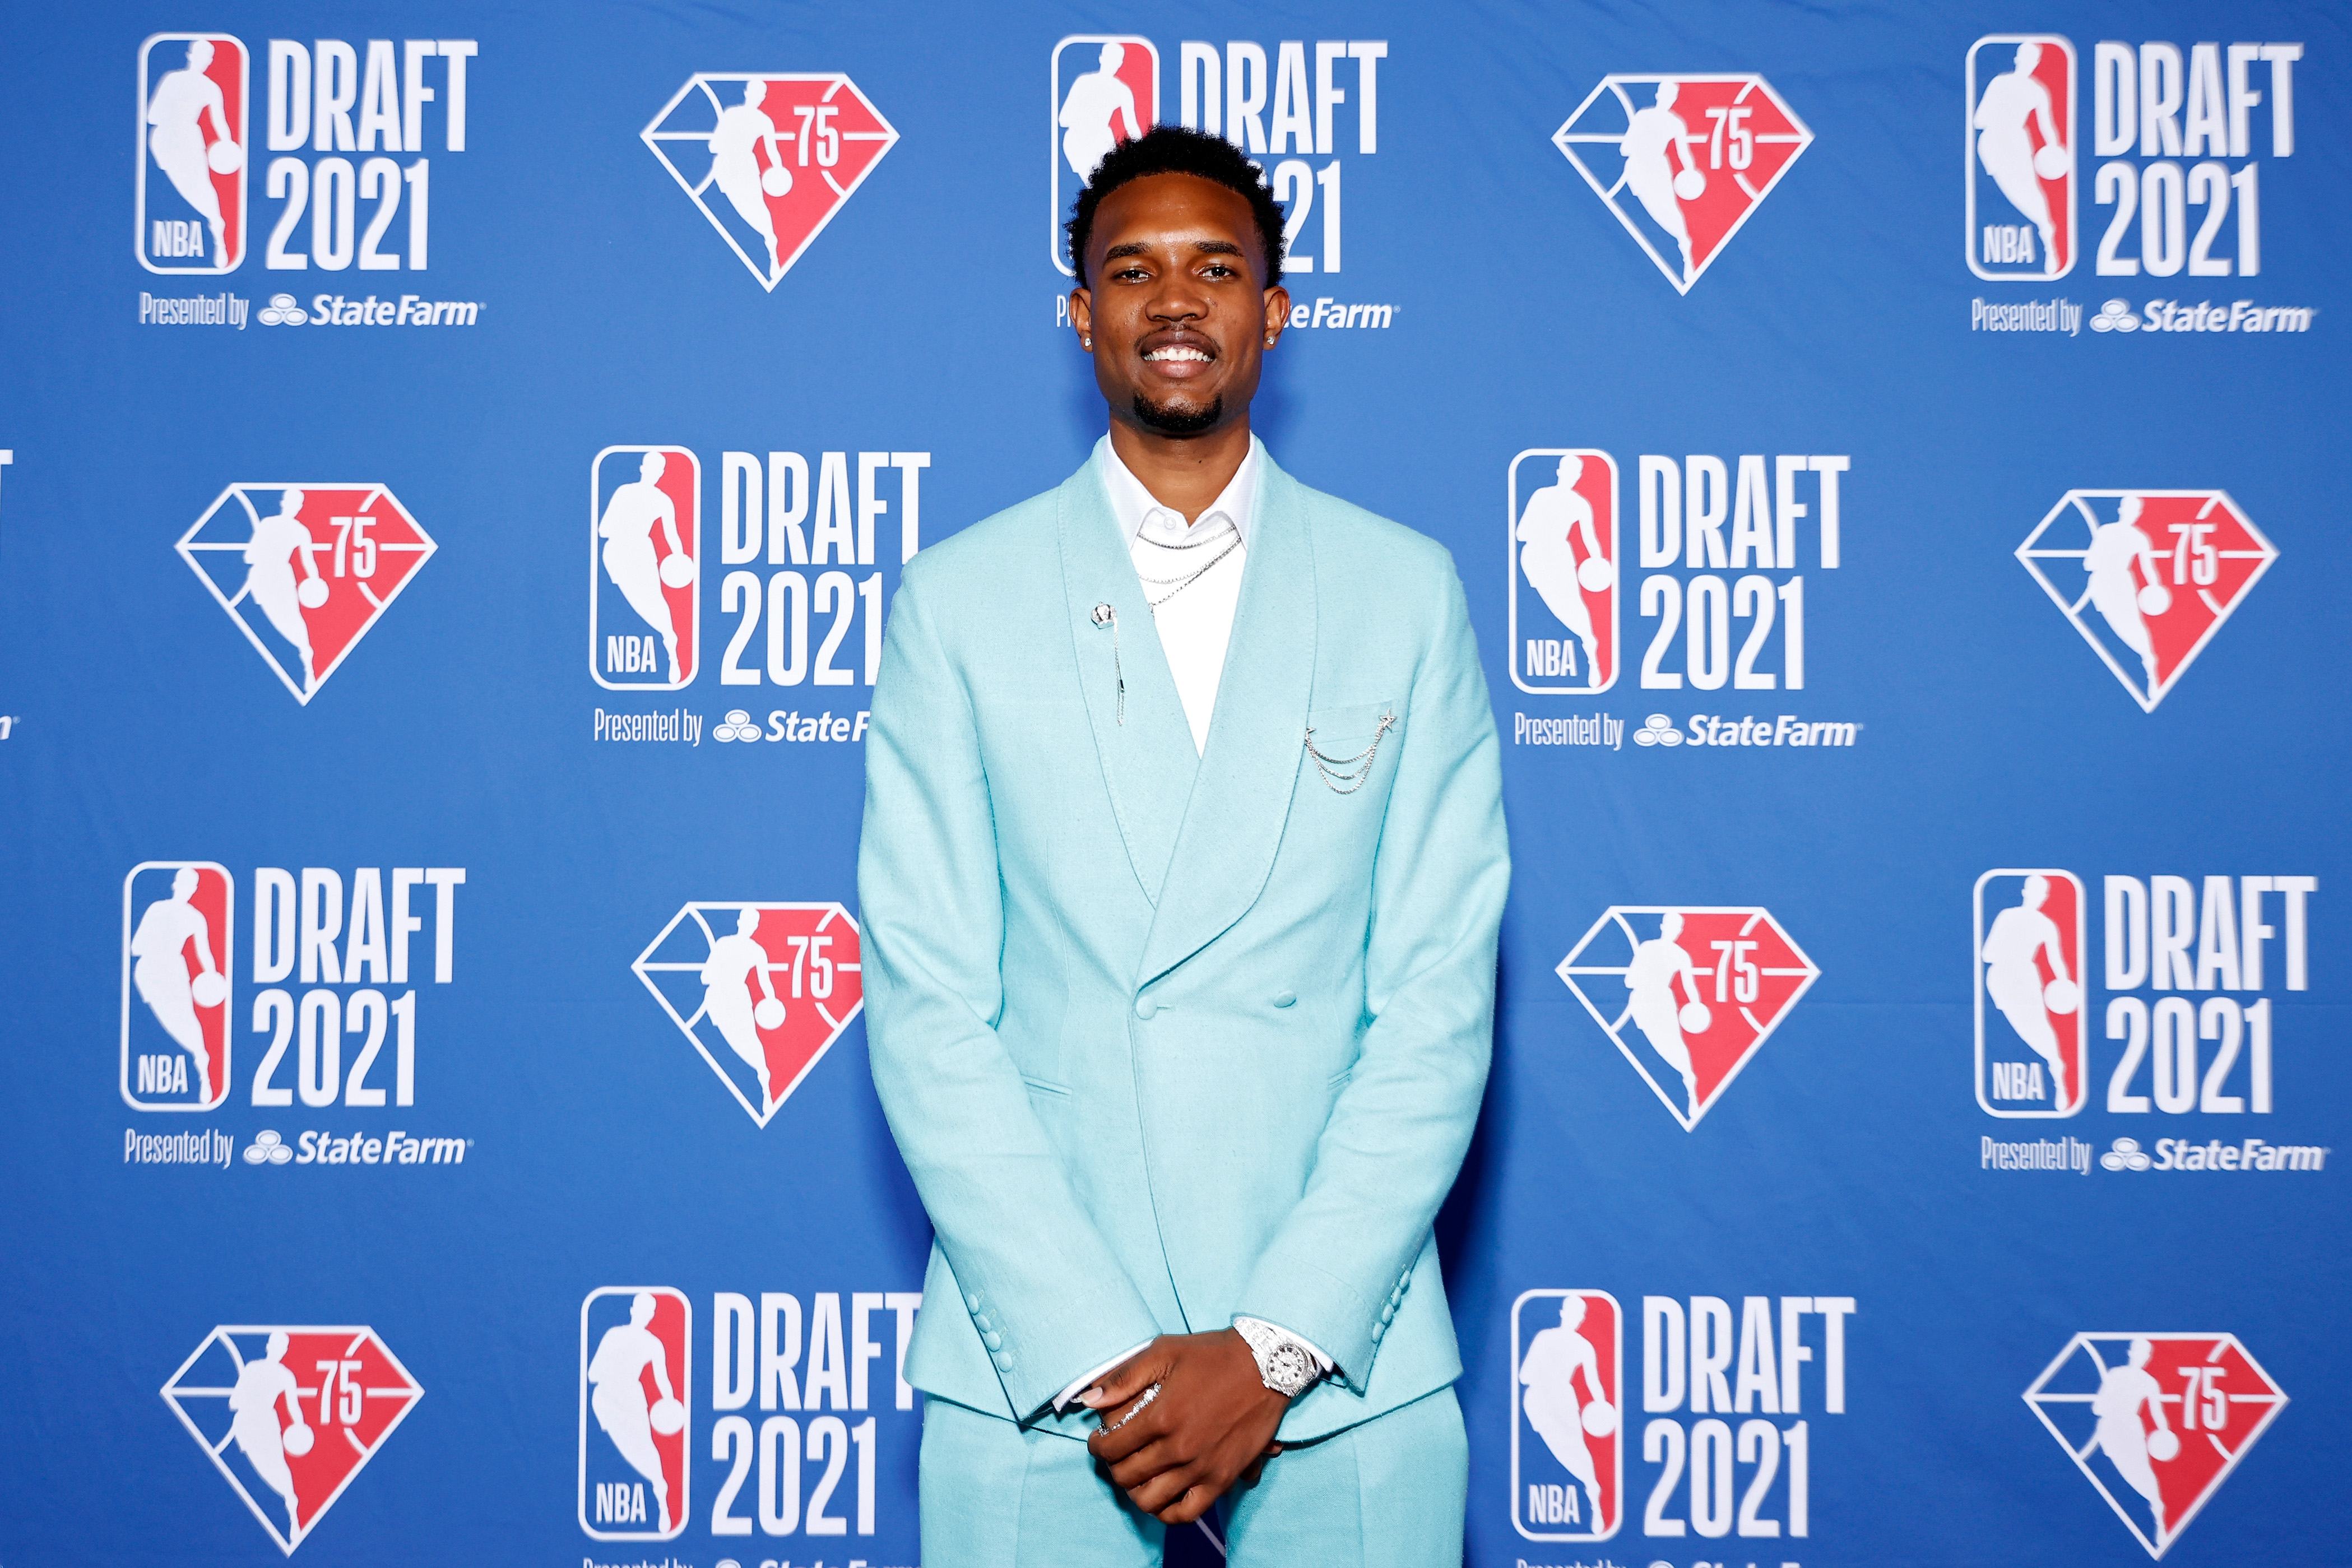 NBA Draft: Evan Mobley's Cleveland Cavs jersey now for sale 